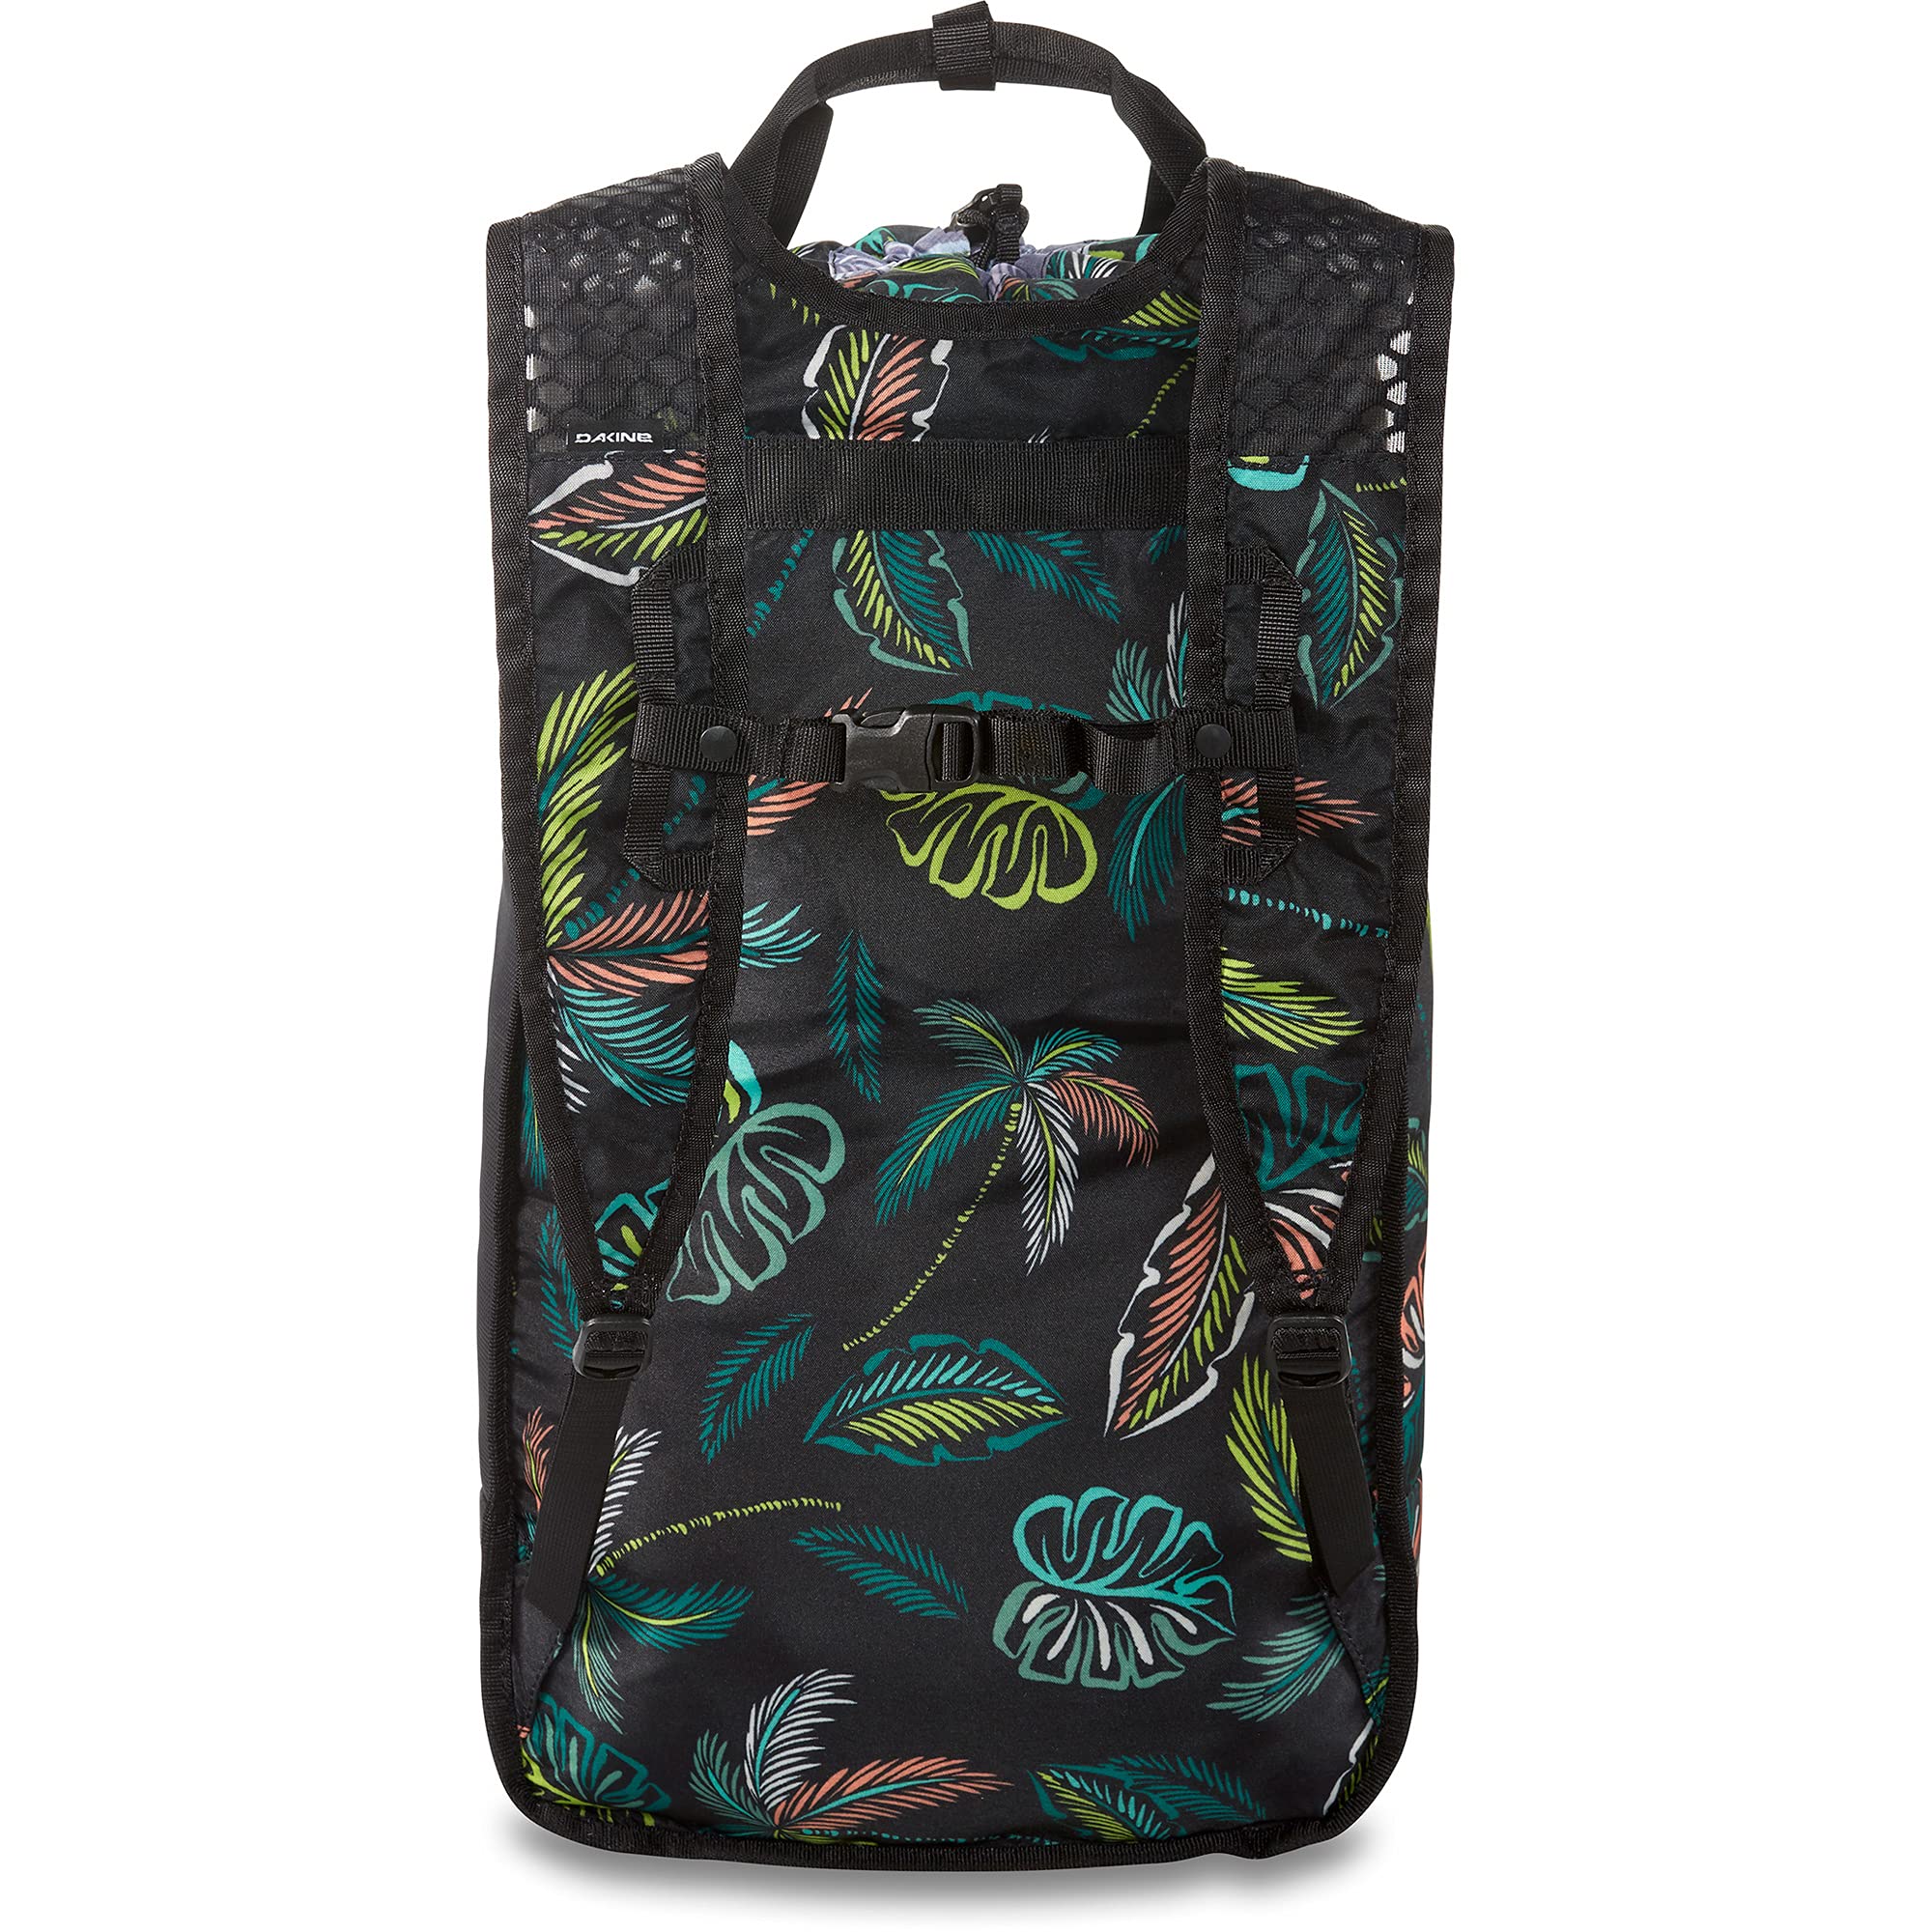 Dakine Packable Backpack 22L - Electric Tropical, One Size